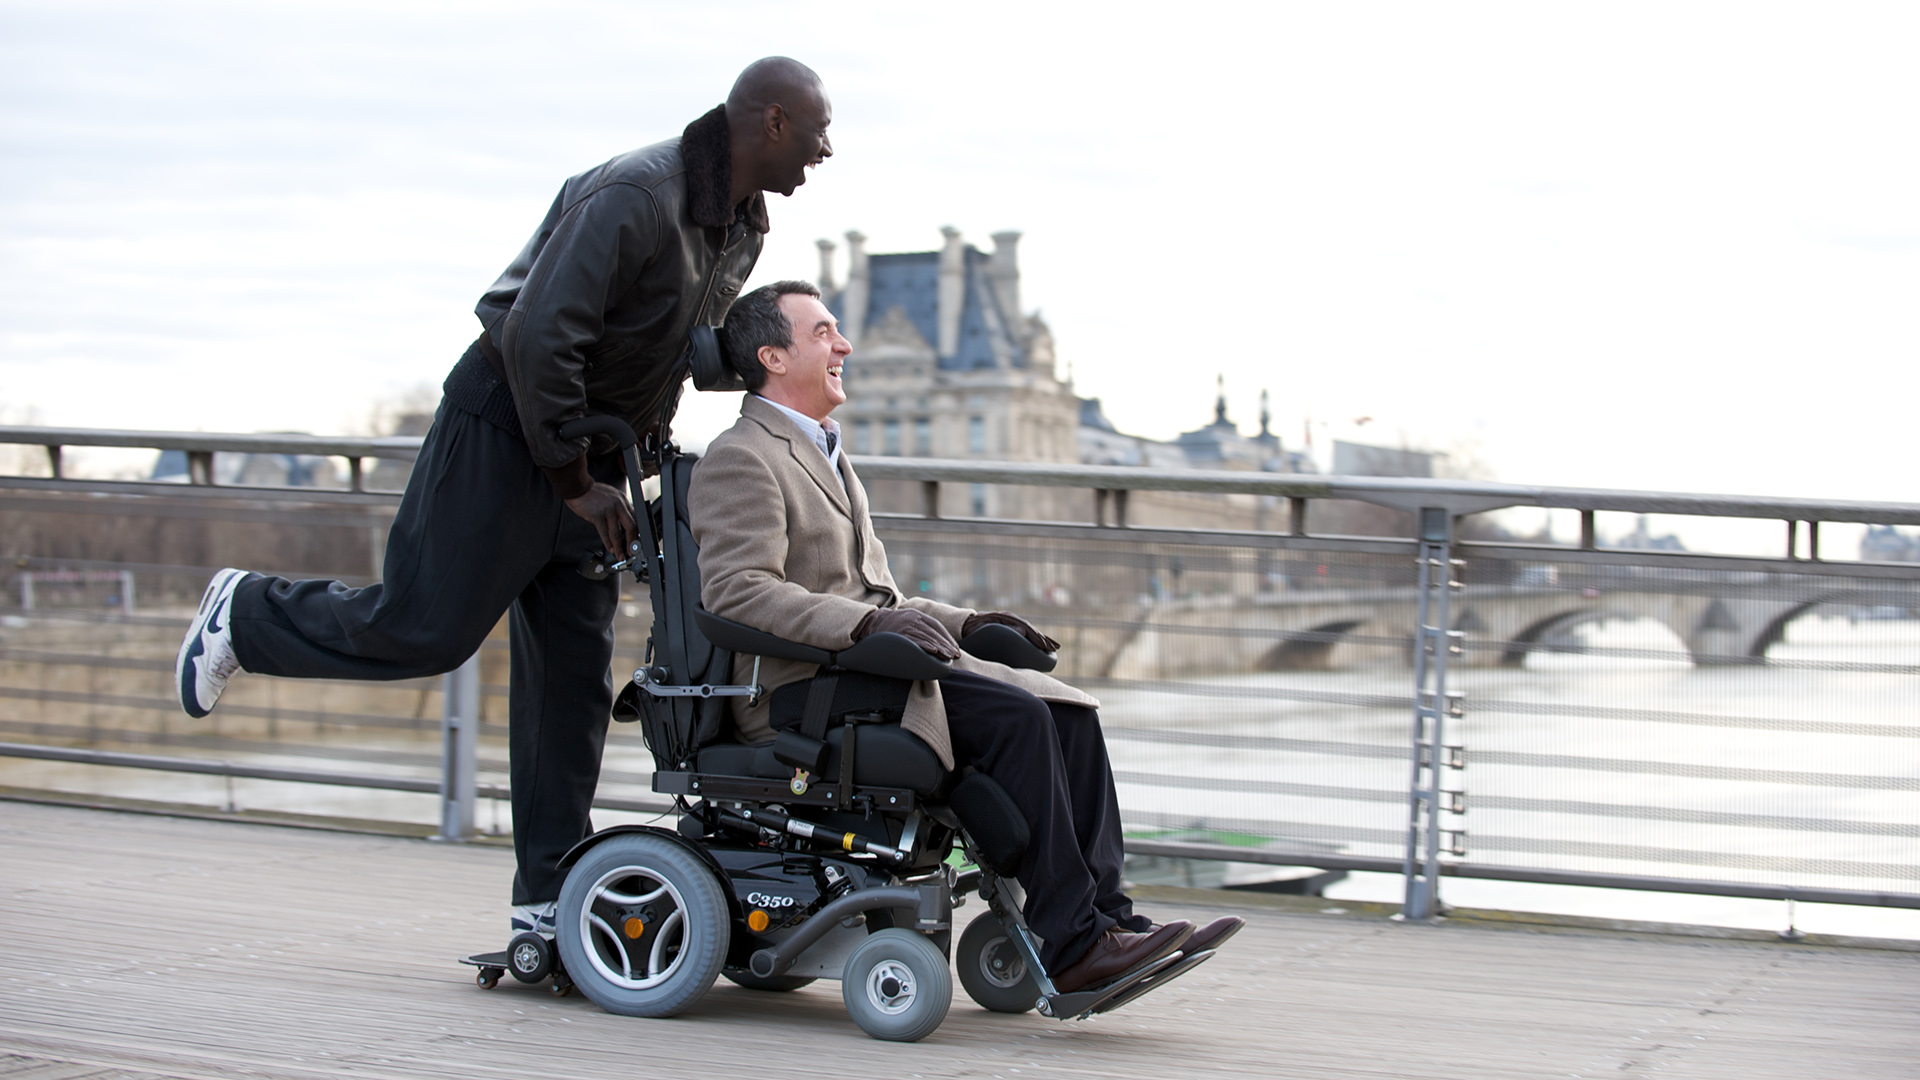 Bridge Driss The Intouchables Francois Cluzet Omar Sy Philippe The Intouchables Smile Wheelchair 1920x1080